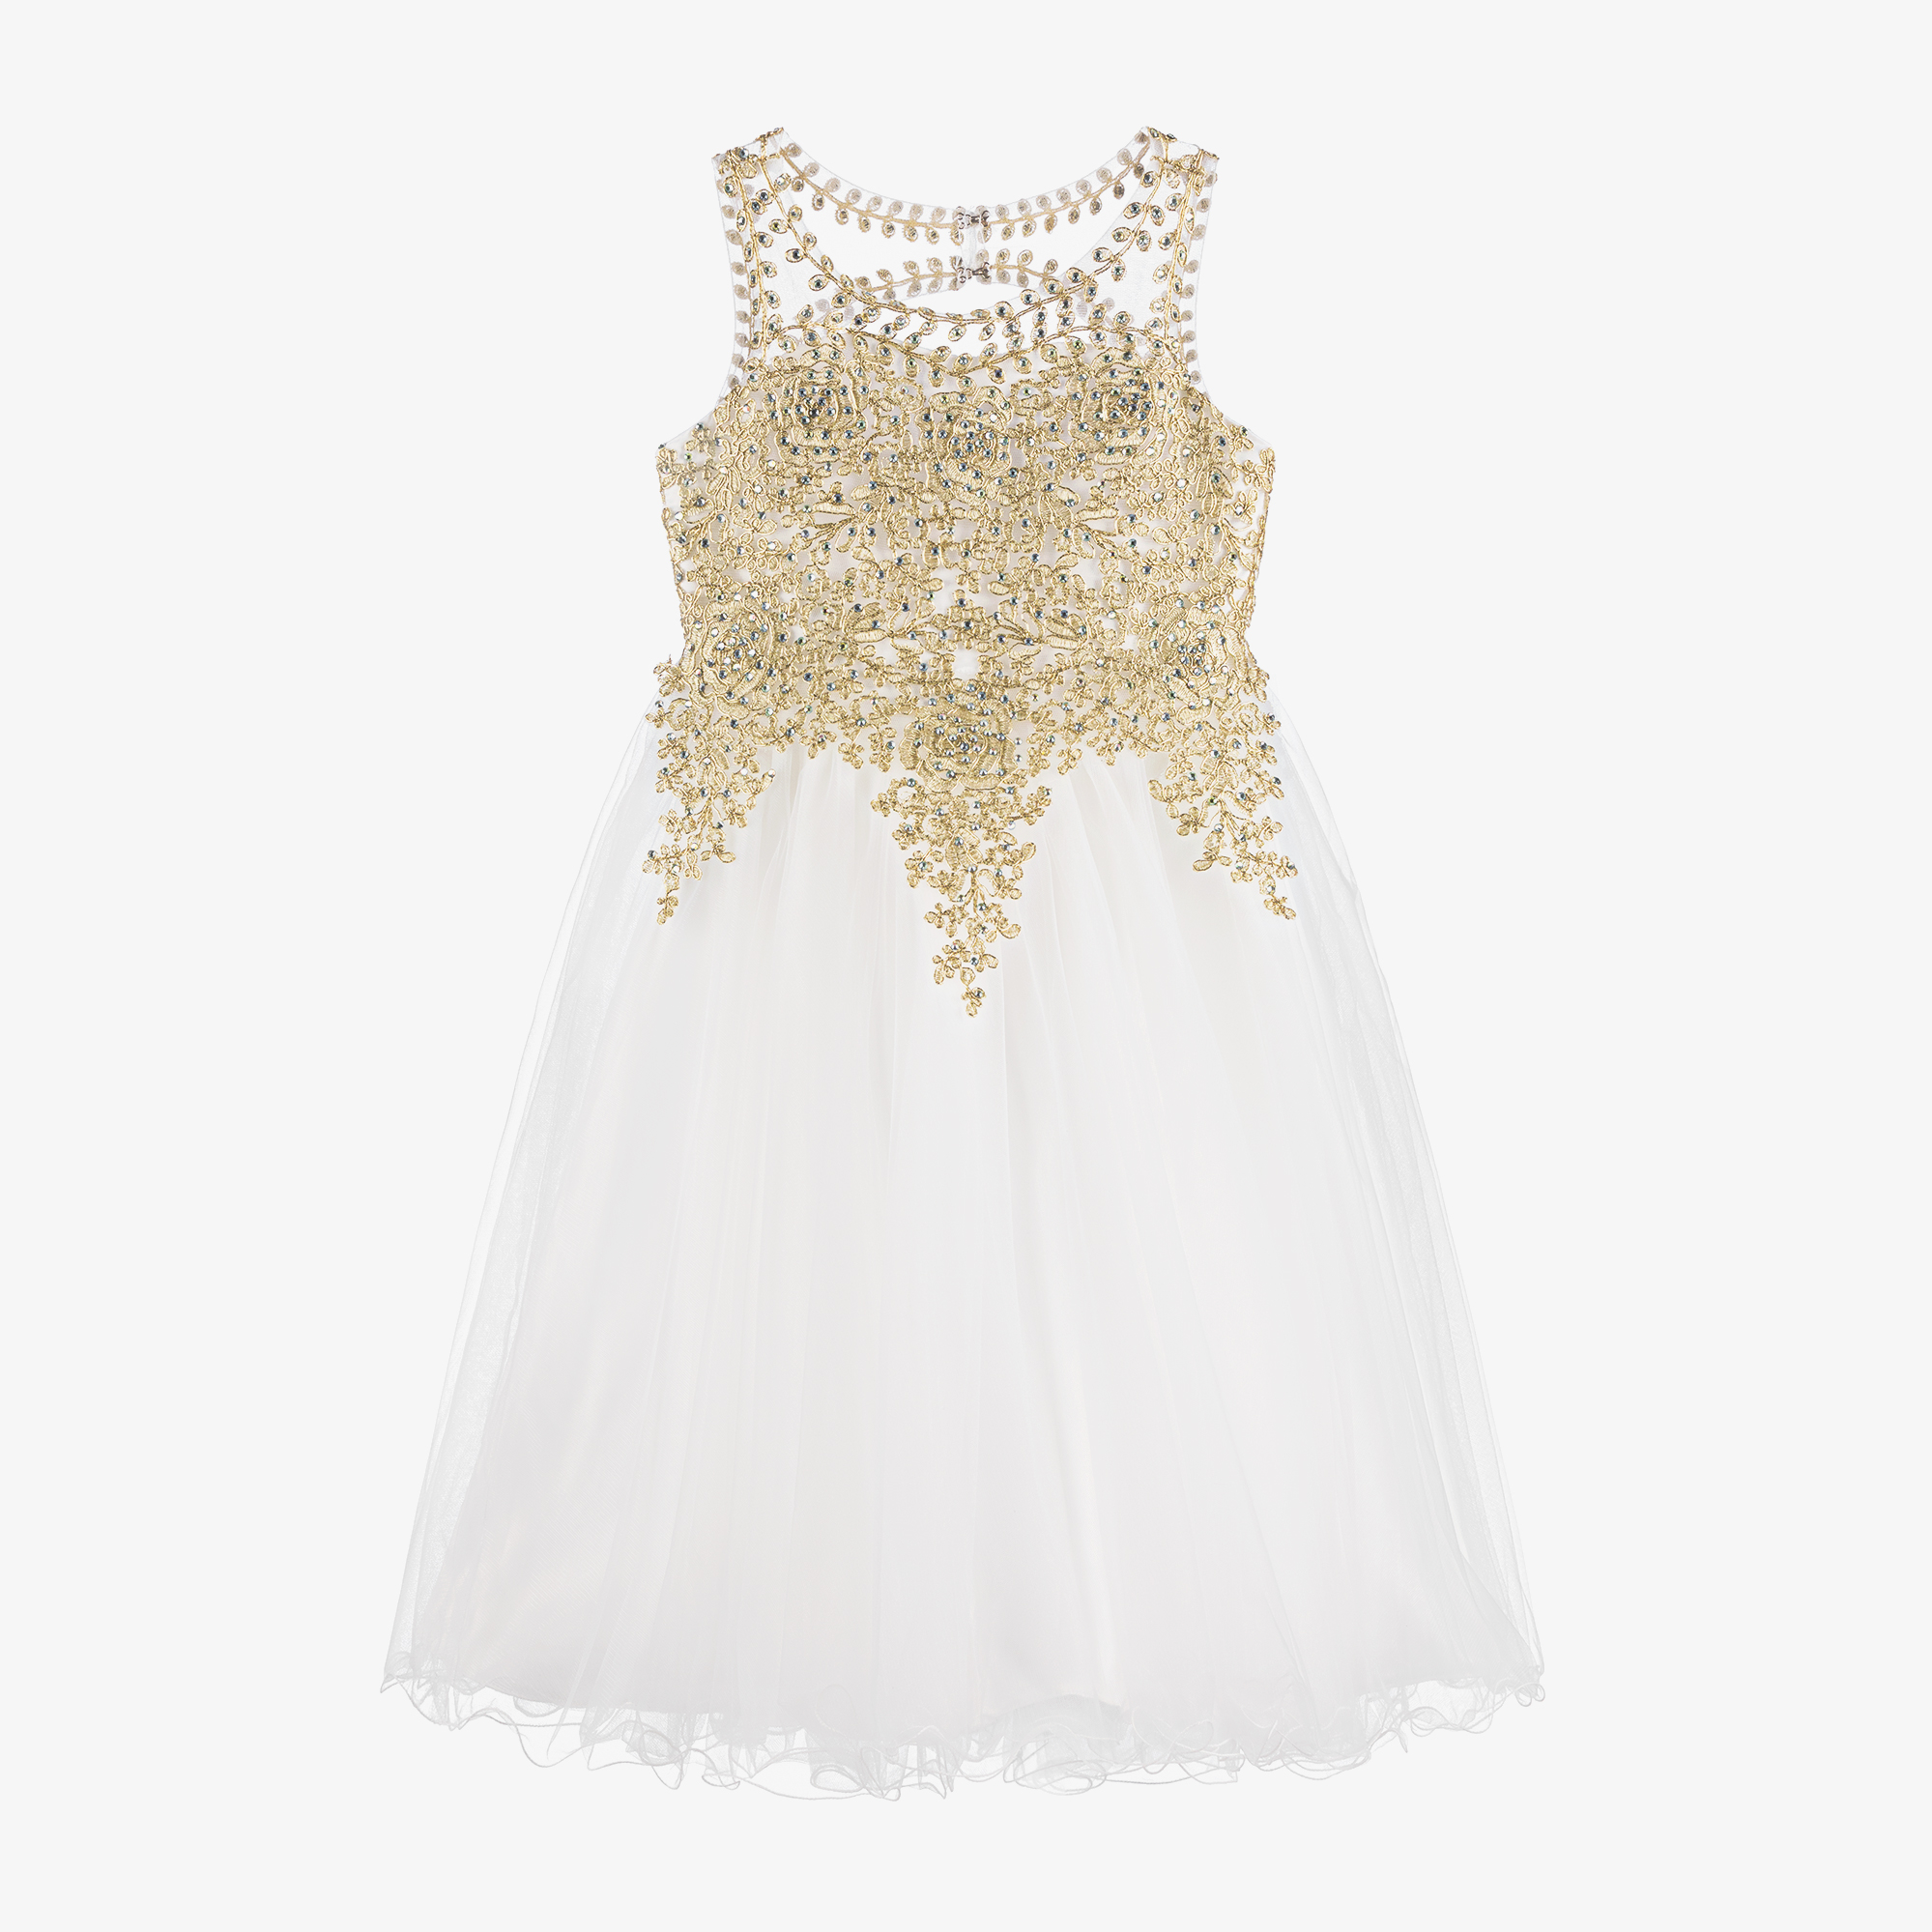 Embroidered Tulle IVORY GOLD